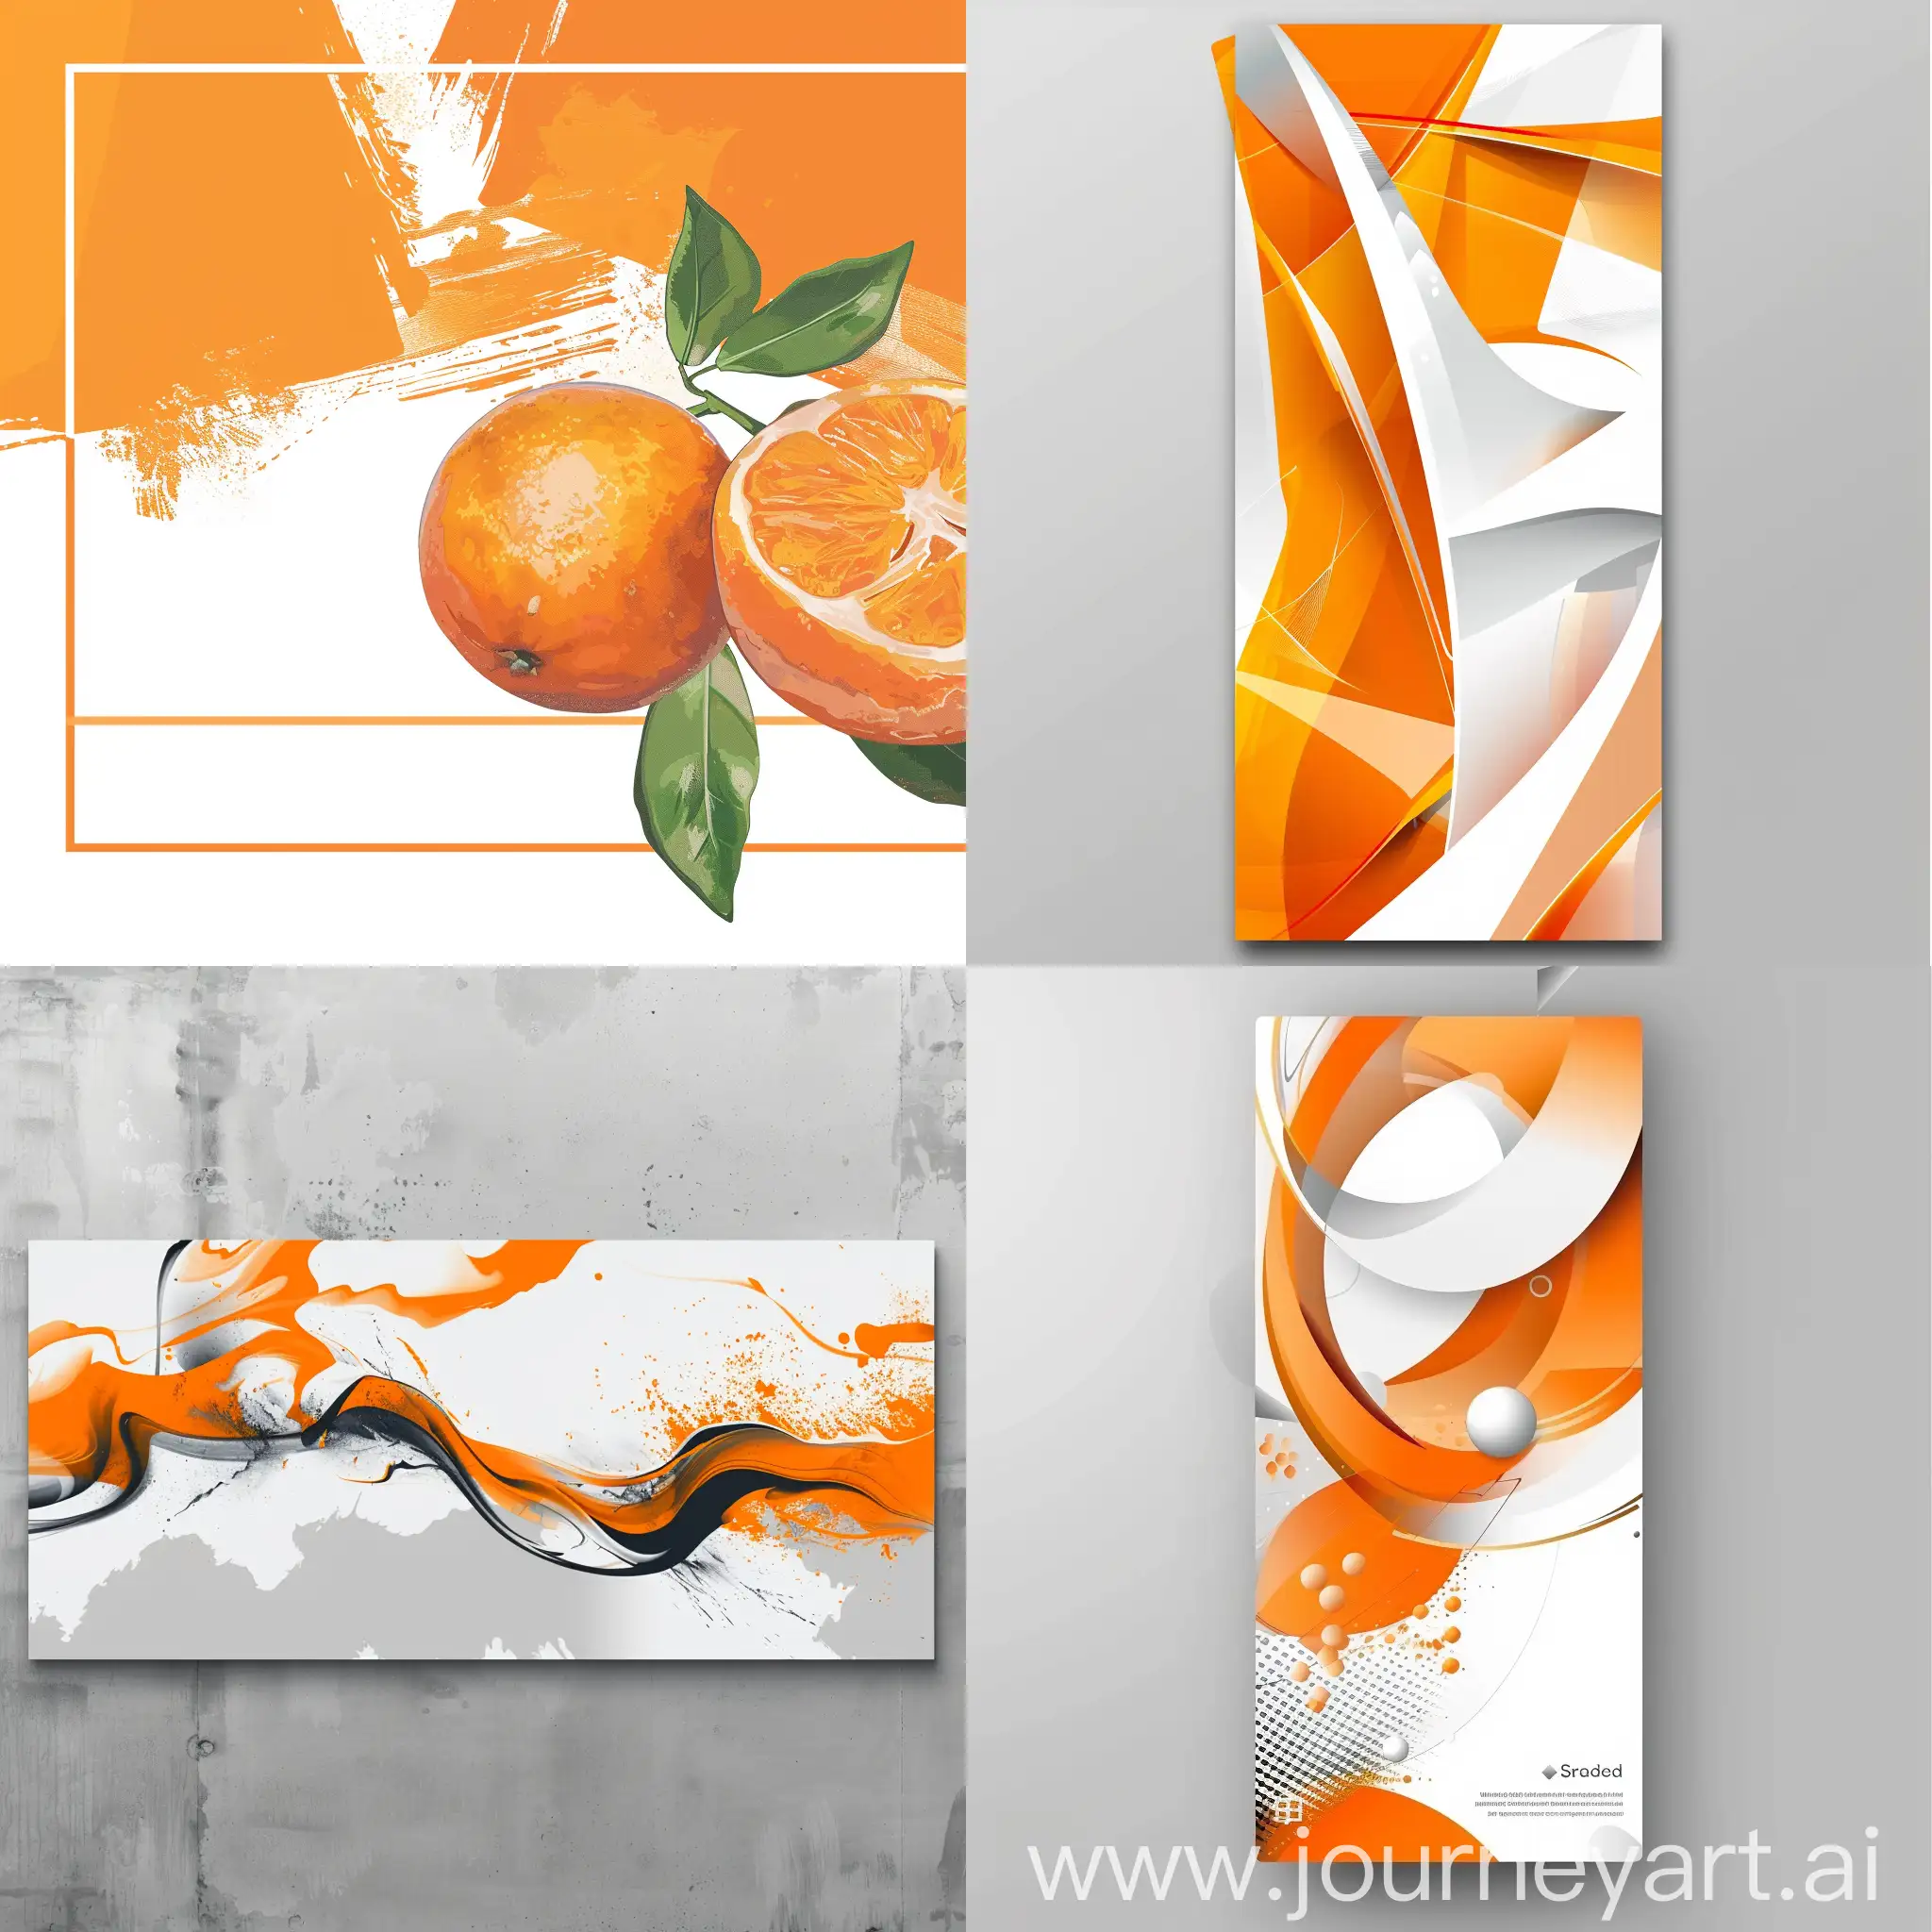 Design an advertising banner with an orange and white theme for a store website
